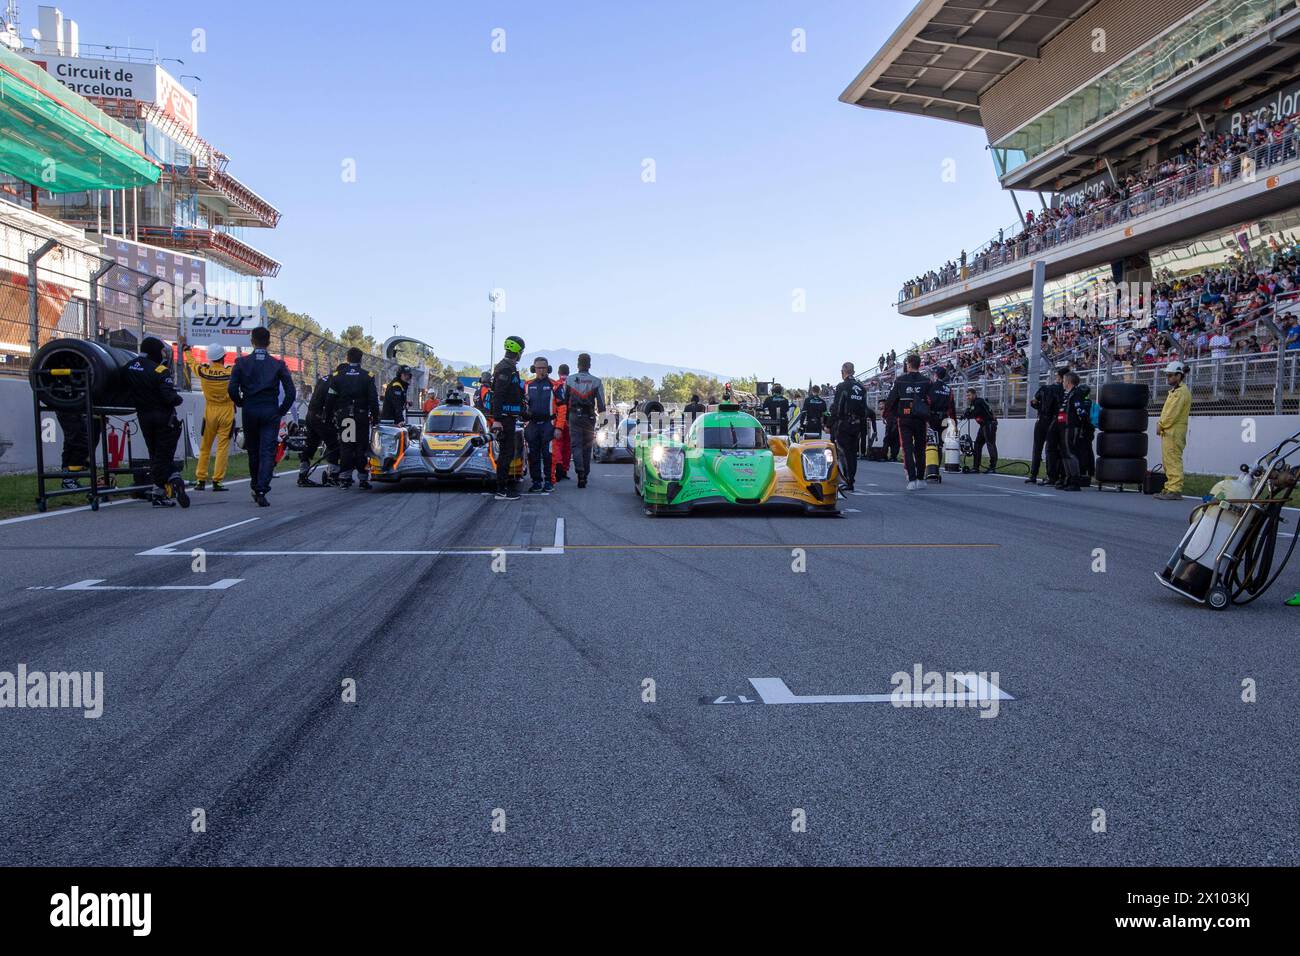 MONTMELO, Spain. 14th Apr, 2024. #34 INTER EUROPOL COMPETITION (POL) ORECA 07 - GIBSON (LMP2) OLIVER GRAY (GBR)/CLÉMENT NOVALAK (FRA)/LUCA GHIOTTO (ITA) DURING THE 4 HOURS OF BARCELONA, FIRST RACE OF THE 2024 EUROPEAN LE MANS SERIES AT CIRCUIT DE BARCELONA-CATALUNYA, MONTMELO (ESP), APRIL 12-14/2024 - Photo Laurent Cartalade/MPS Agency Credit MPS Agency/Alamy Live News Stock Photo